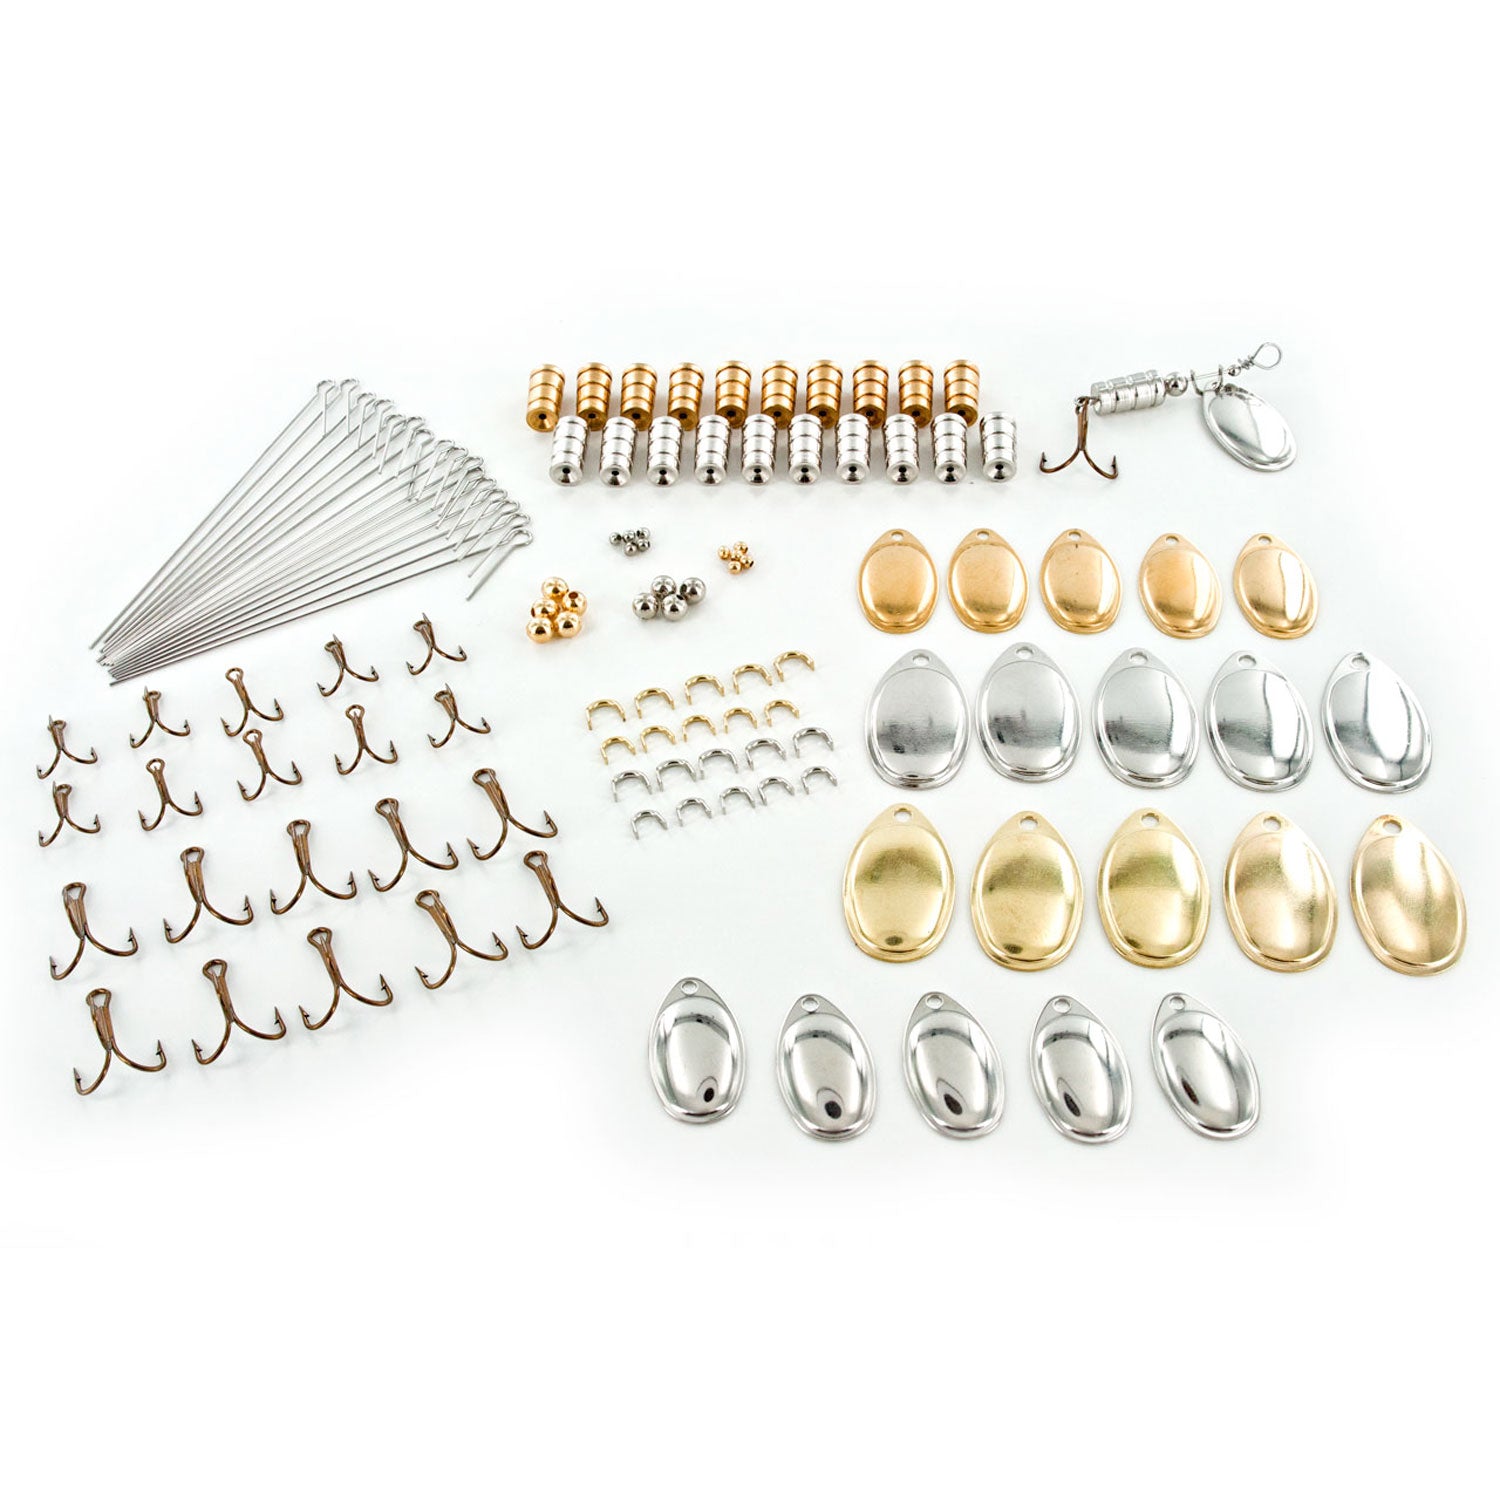 98pcs Inline Spinner Making Kit Spinning Body Blades Accessories